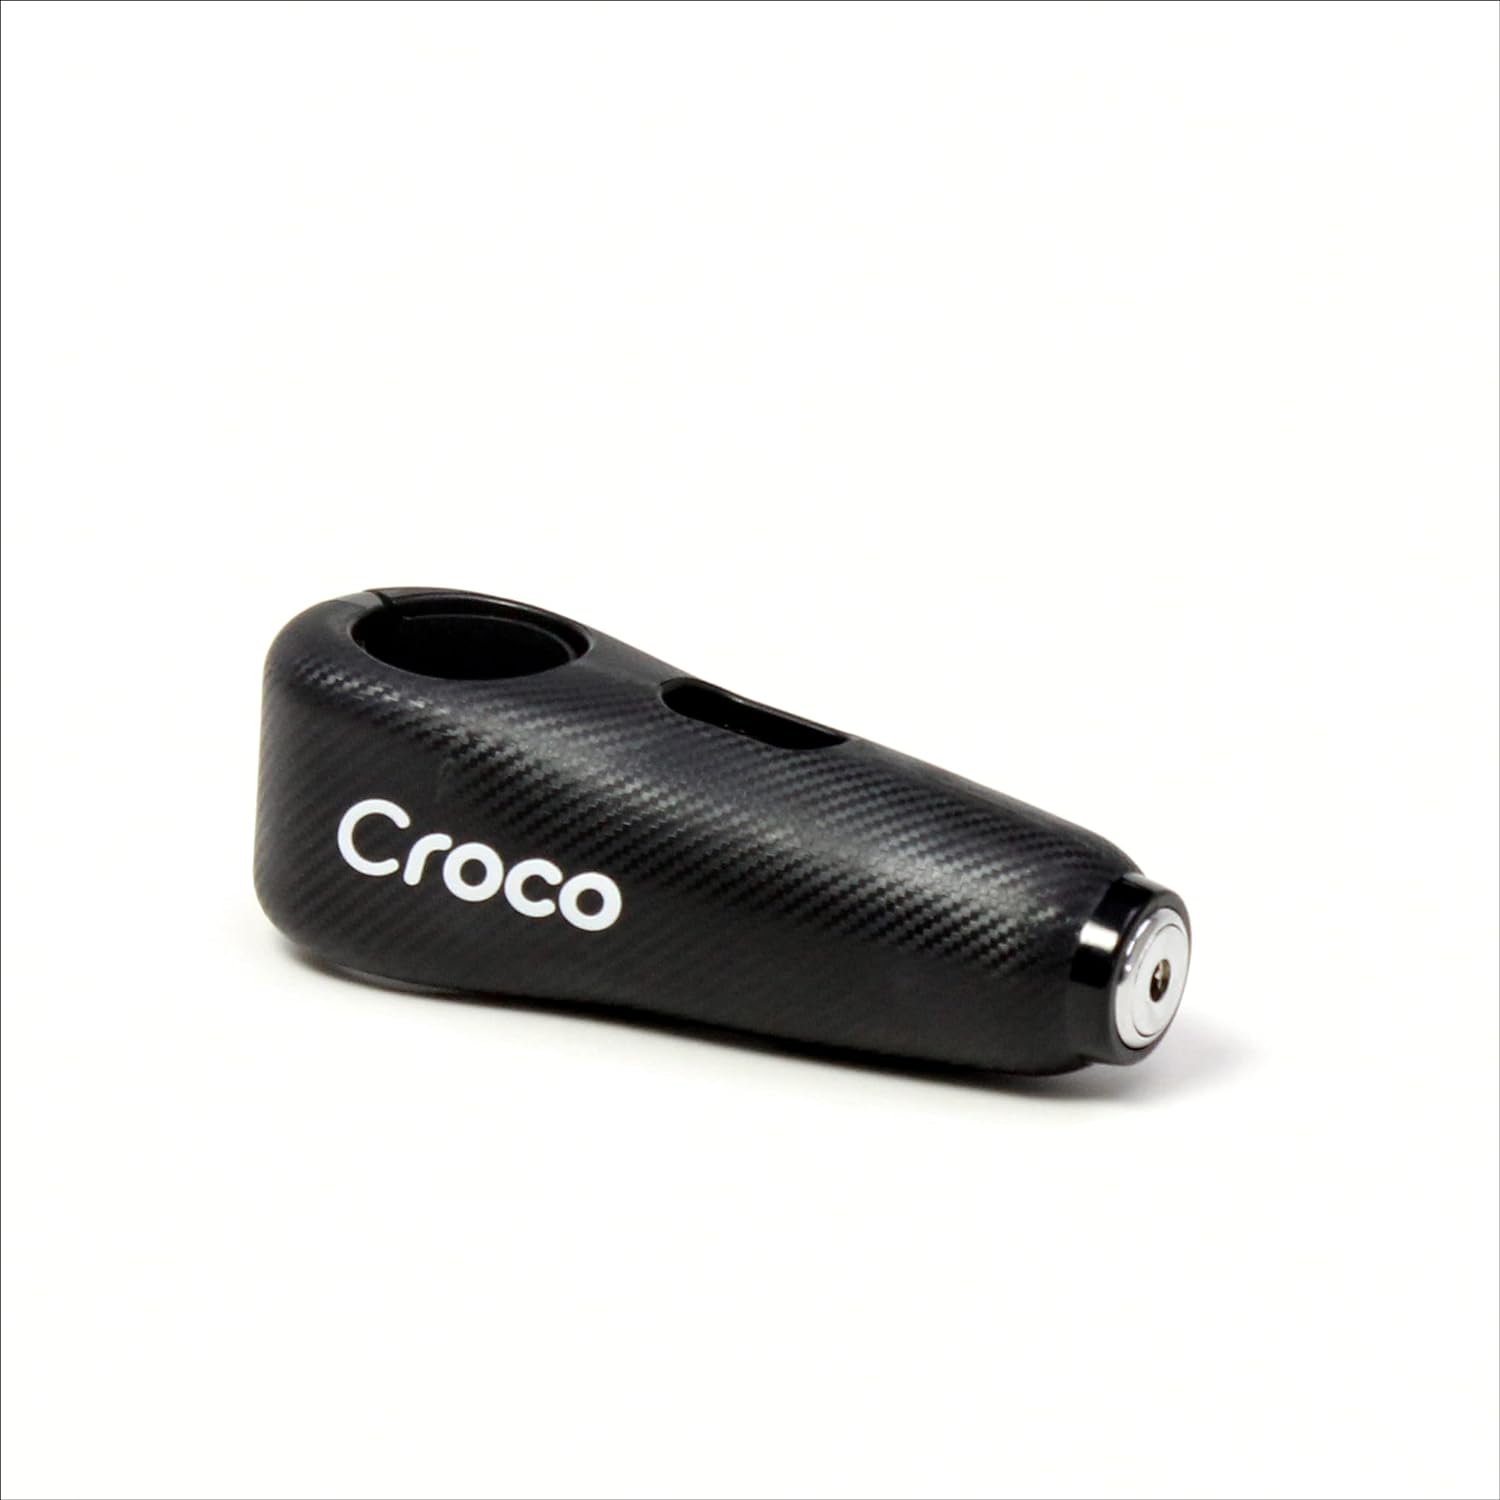 The image shows a close-up view of a black Croco lock with a carbon fiber-like texture on its surface. The lock appears robust and is branded with the Croco logo in white letters, suggesting a focus on strong visual branding. The keyhole is at one end of the lock, hinting at a high-security cylinder mechanism. The design is sleek and modern, and the overall impression is that of a sturdy, reliable lock for securing valuable items